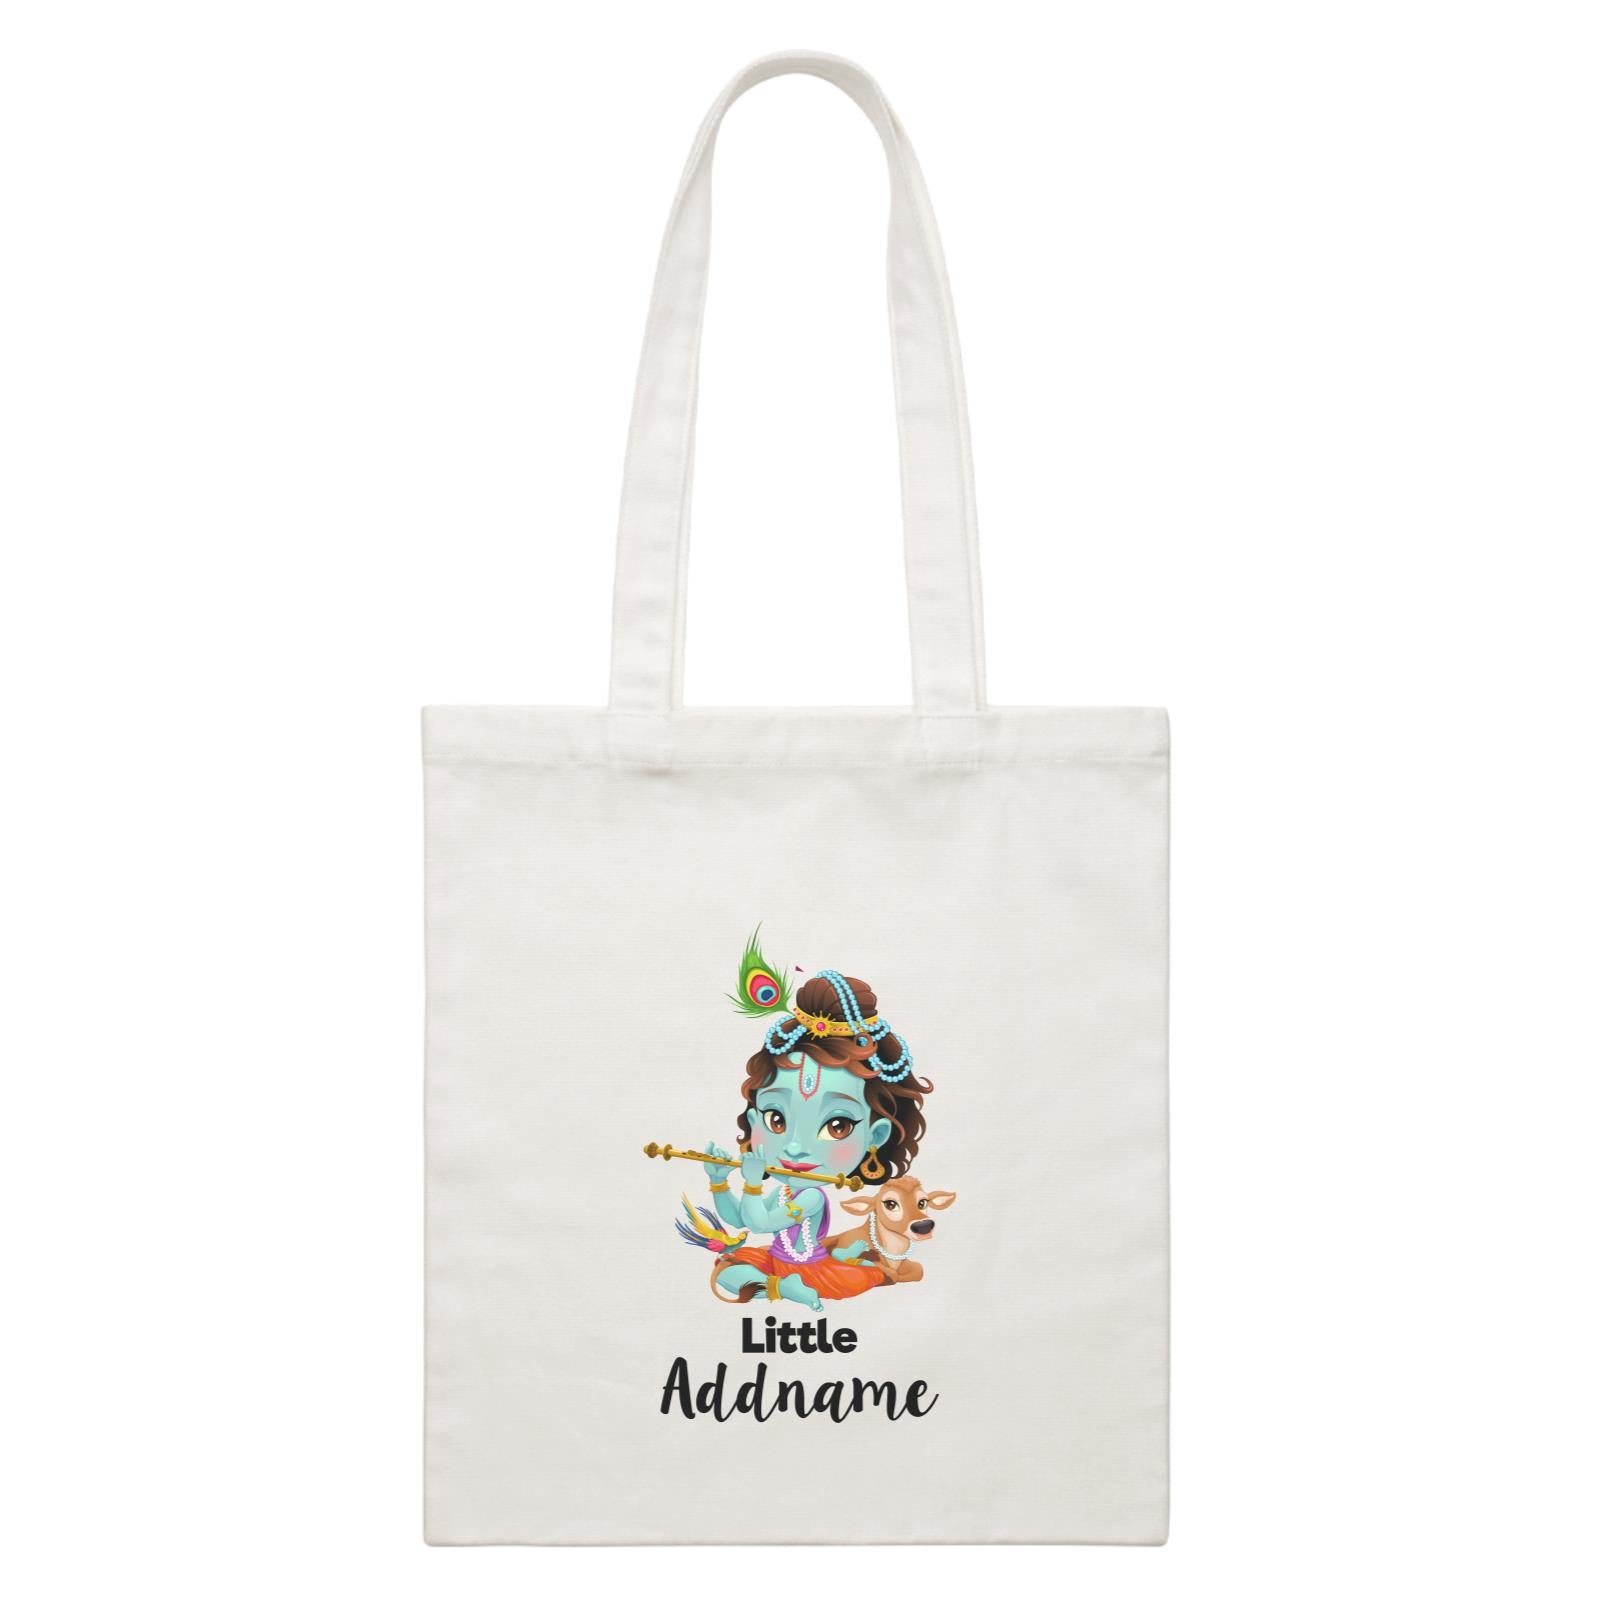 Artistic Krishna Playing Flute with Cow Little Addname White Canvas Bag